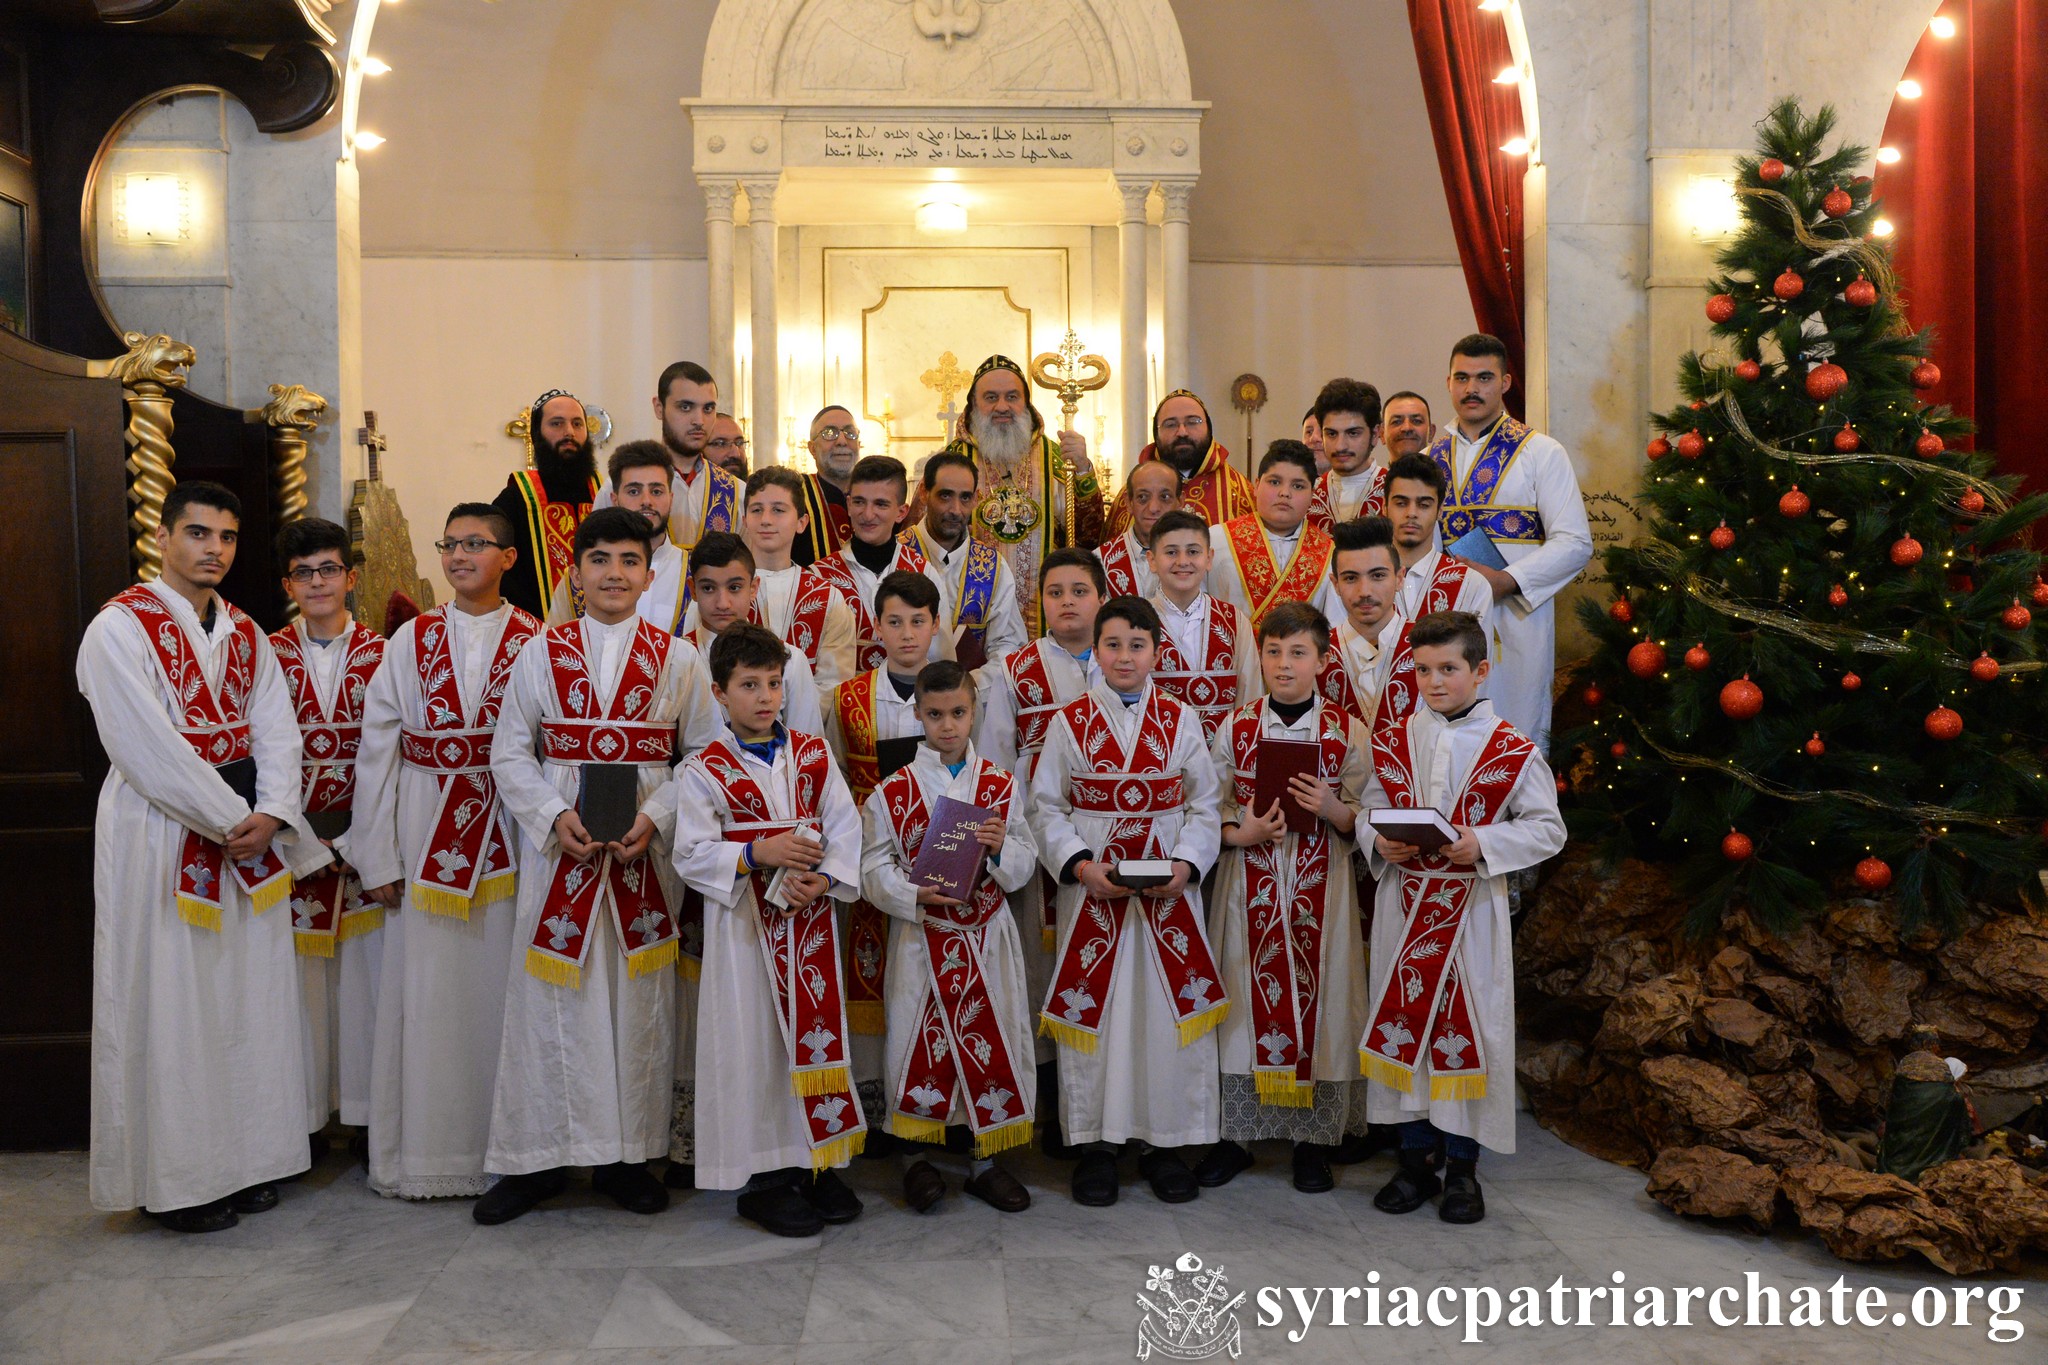 Ordination of 24 Qoruye (readers) for the Patriarchal Archdiocese of Damascus